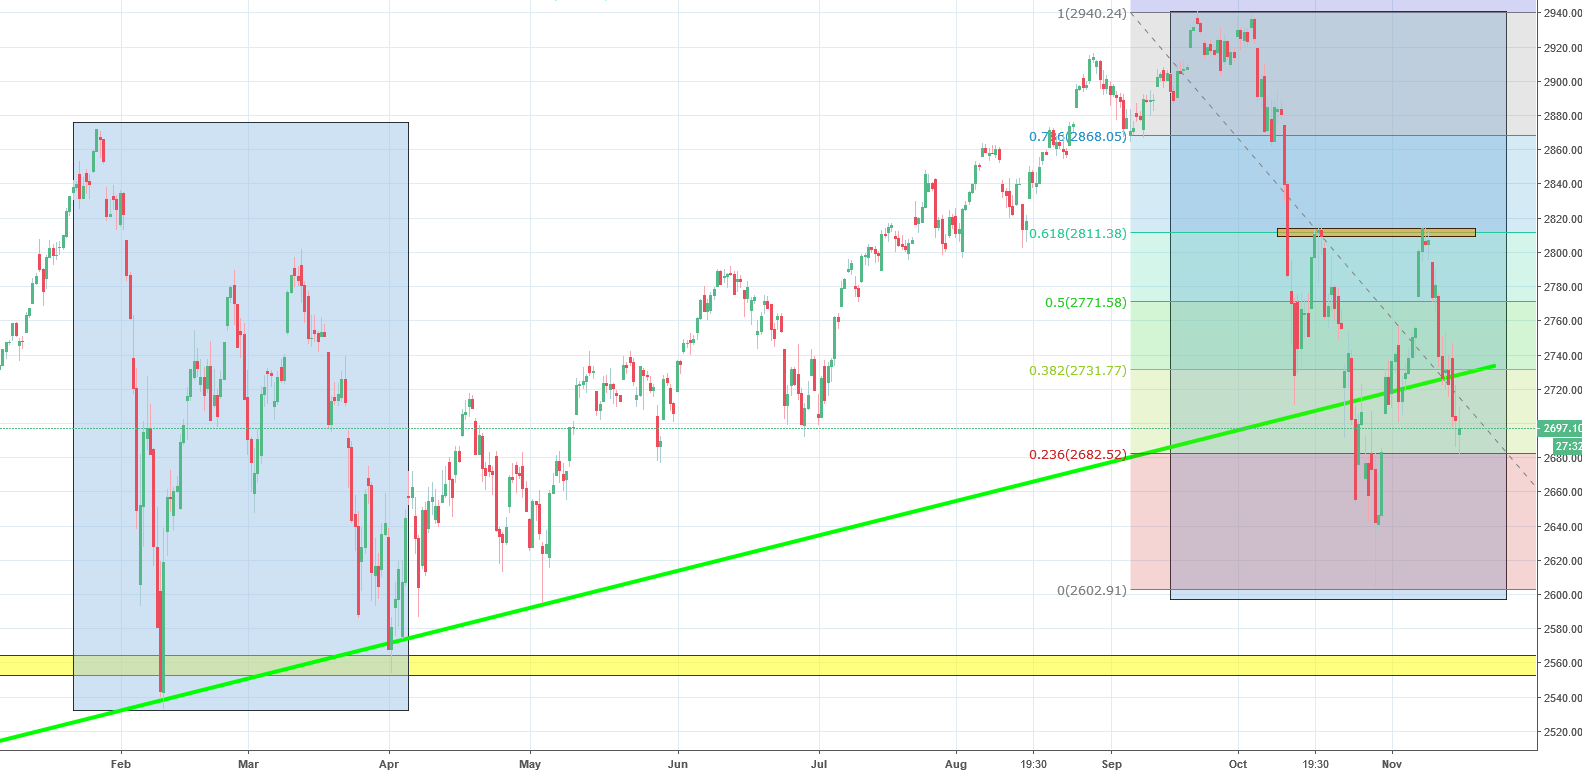 S&P 500 Analysis - more decline or an iH&S? 